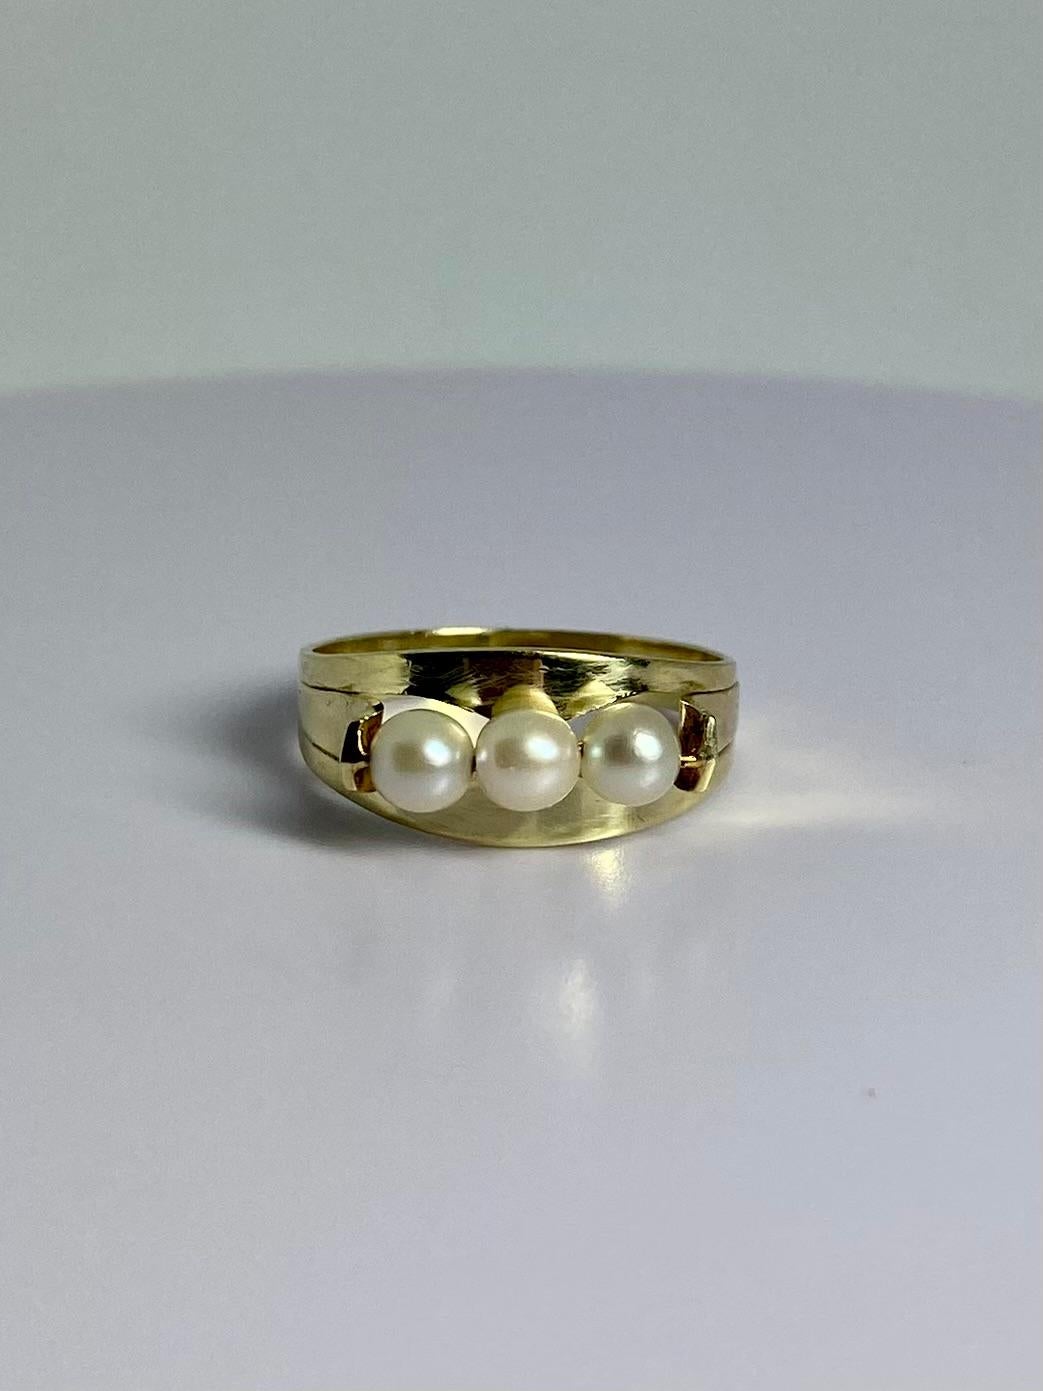 This is something else, elegant & refined. This preloved jewel is made of 14 carat yellow gold and is set with 3 white round pearls. The pearls are set in an open setting. Weighs about 2.5 grams and has ring size 6 1/2 (US), N (UK) 17 (EU). This